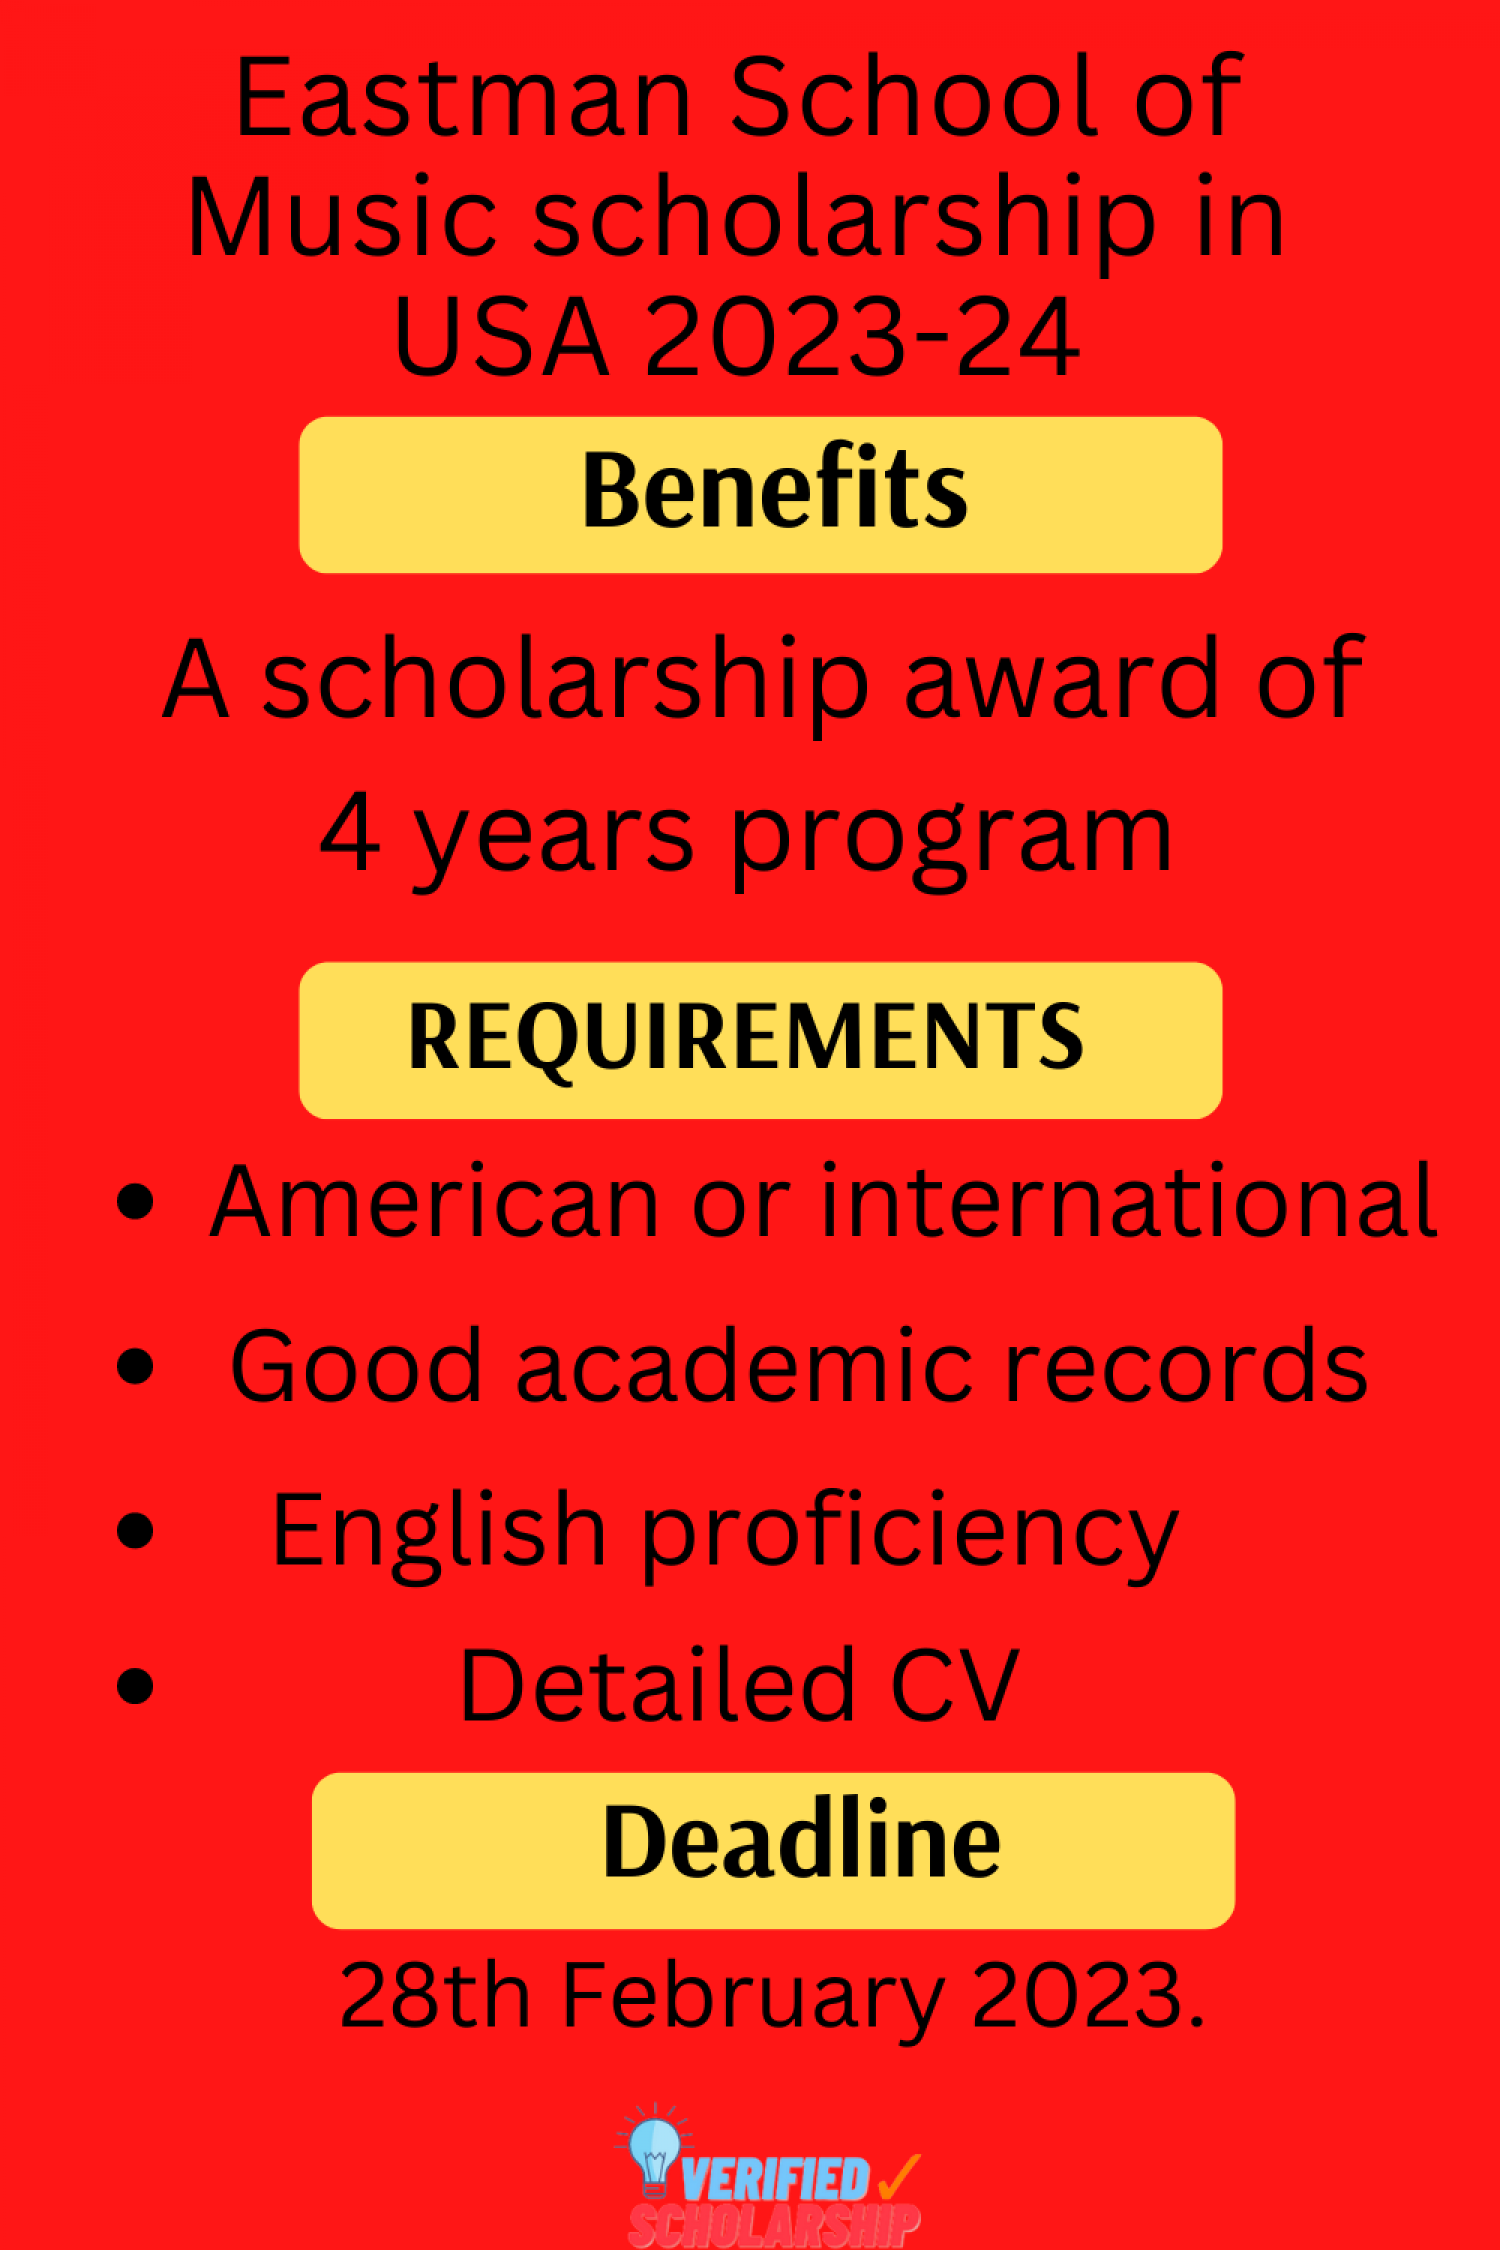 Eastman School of Music scholarship in USA 2023-24 Infographic